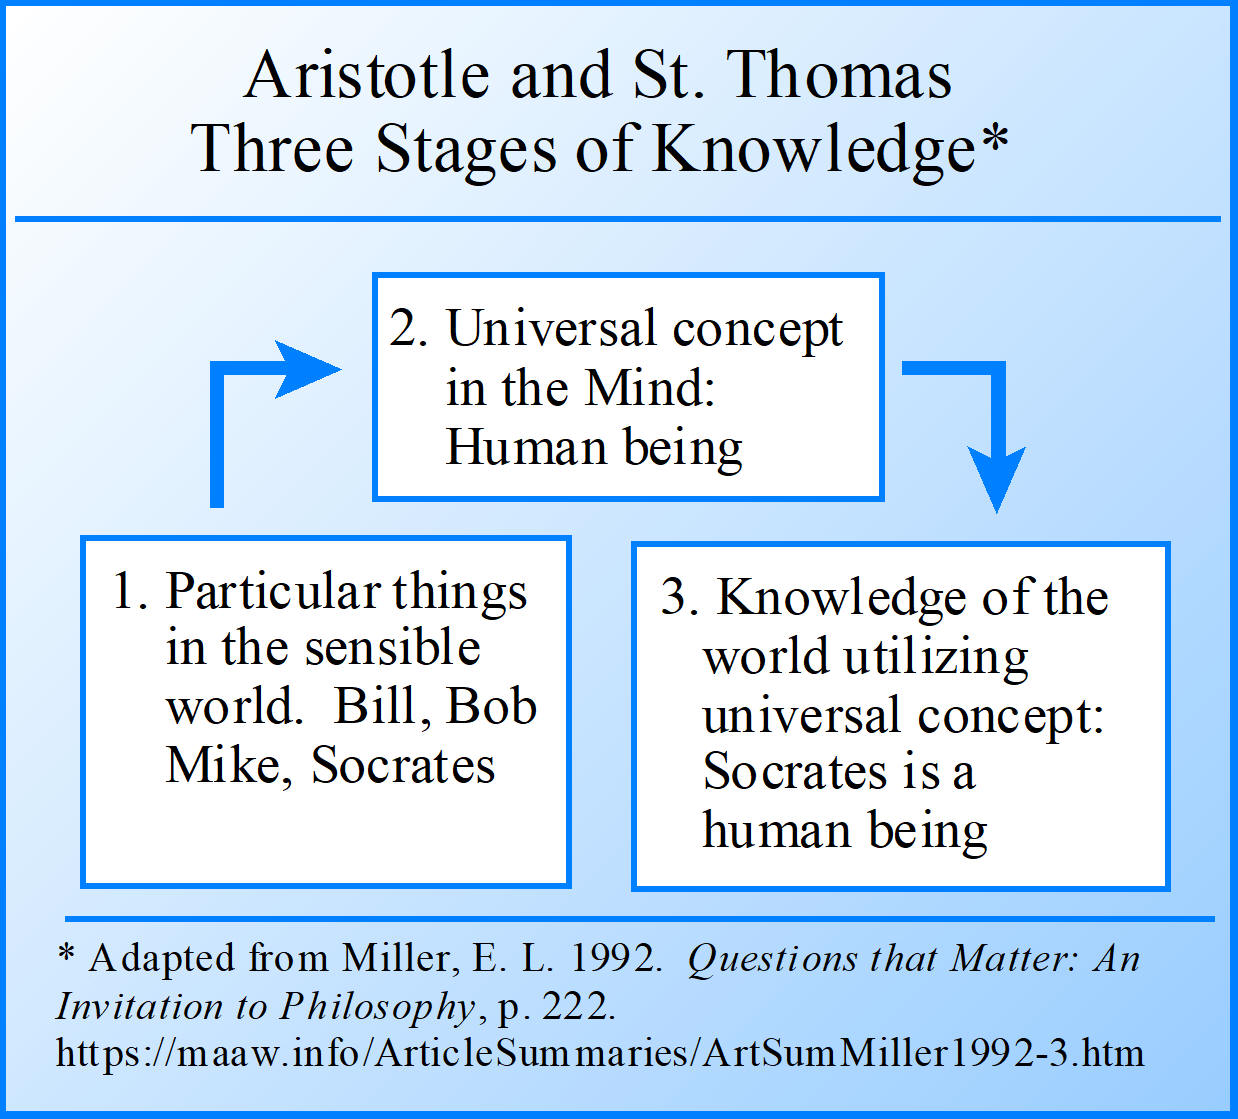 Three Stages of Knowledge according to Aristotle and St. Thomas